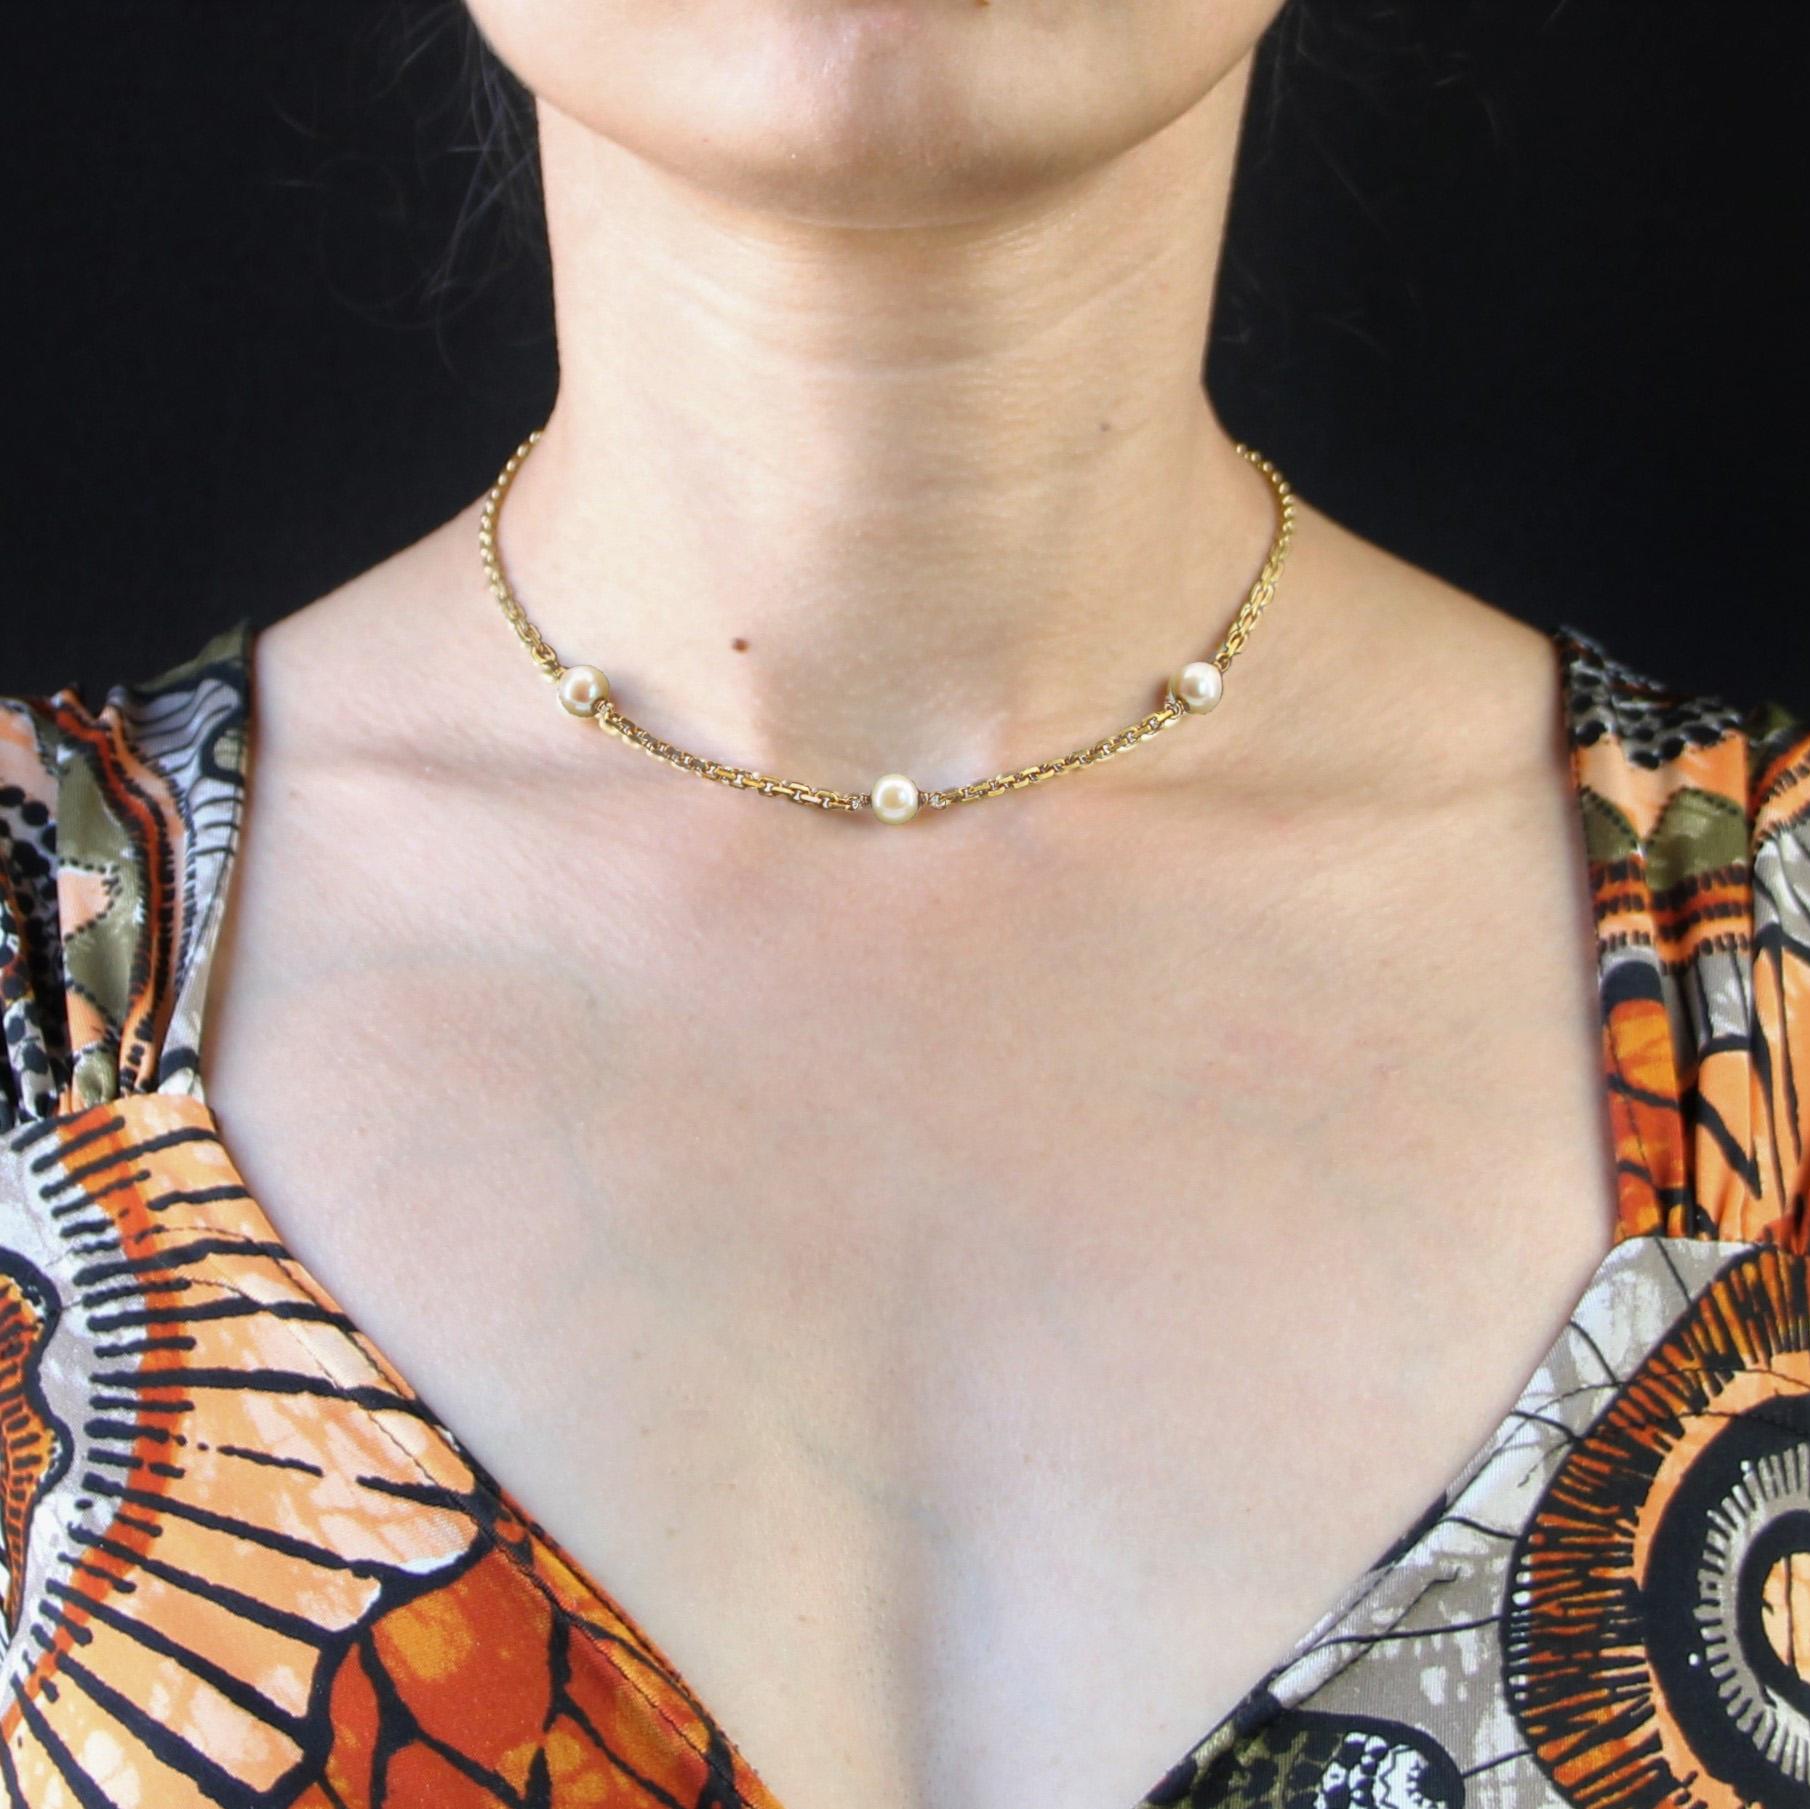 Necklace in 18 karat yellow gold.
Delightful choker necklace featuring a filed convict chain punctuated with 3 cream pearly cultured pearls. The clasp is a spring ring with safety chain.
Diameter of the pearls : 6/6,5 mm approximately.
Length : 36